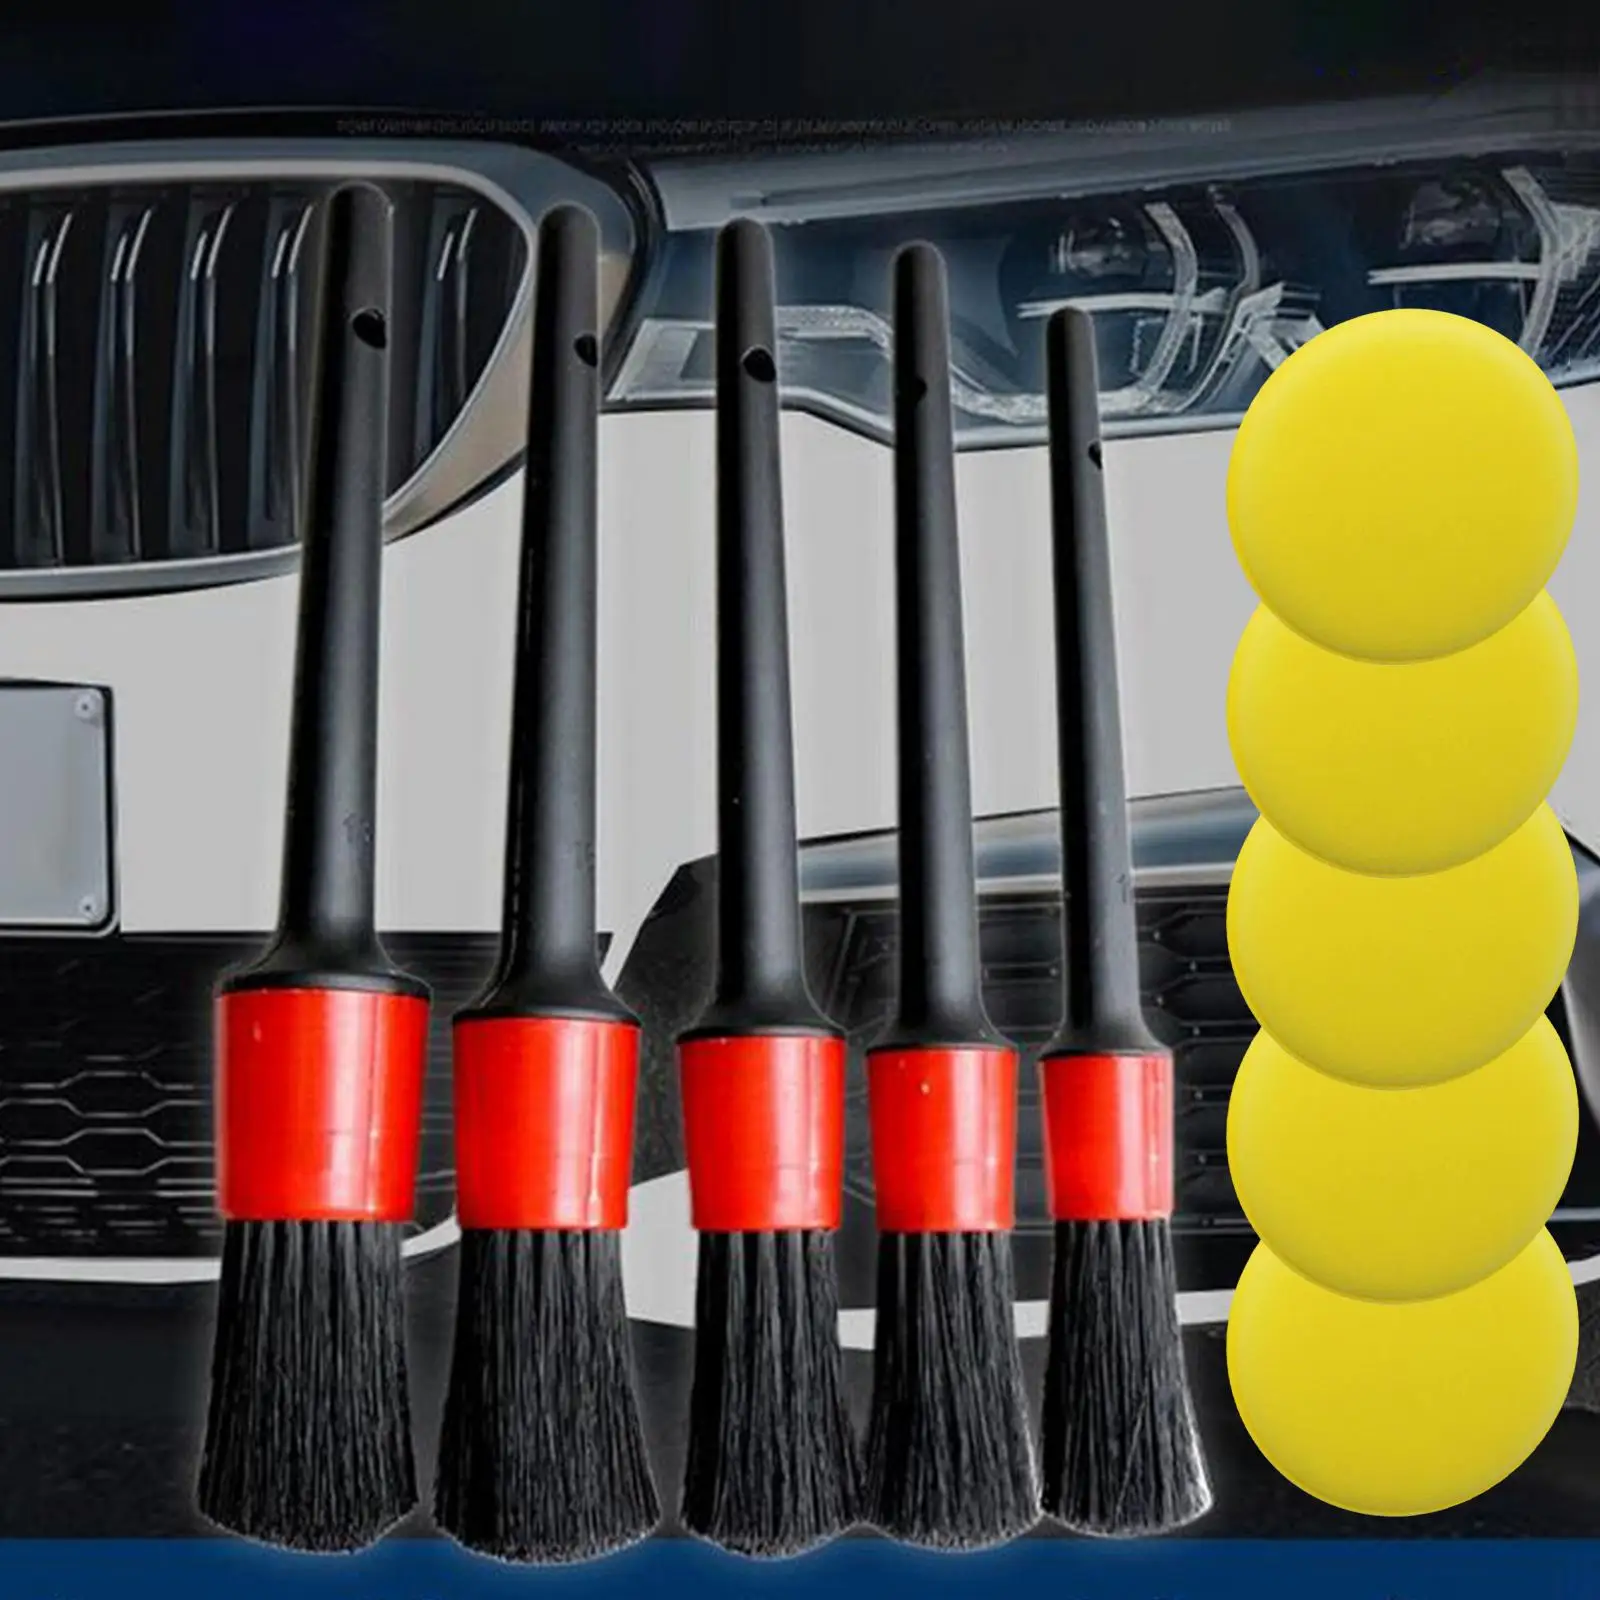 5x Auto Detailing Brush Set Detail Cleaner Brushes Fit for Seat Wheel Interior Exterior